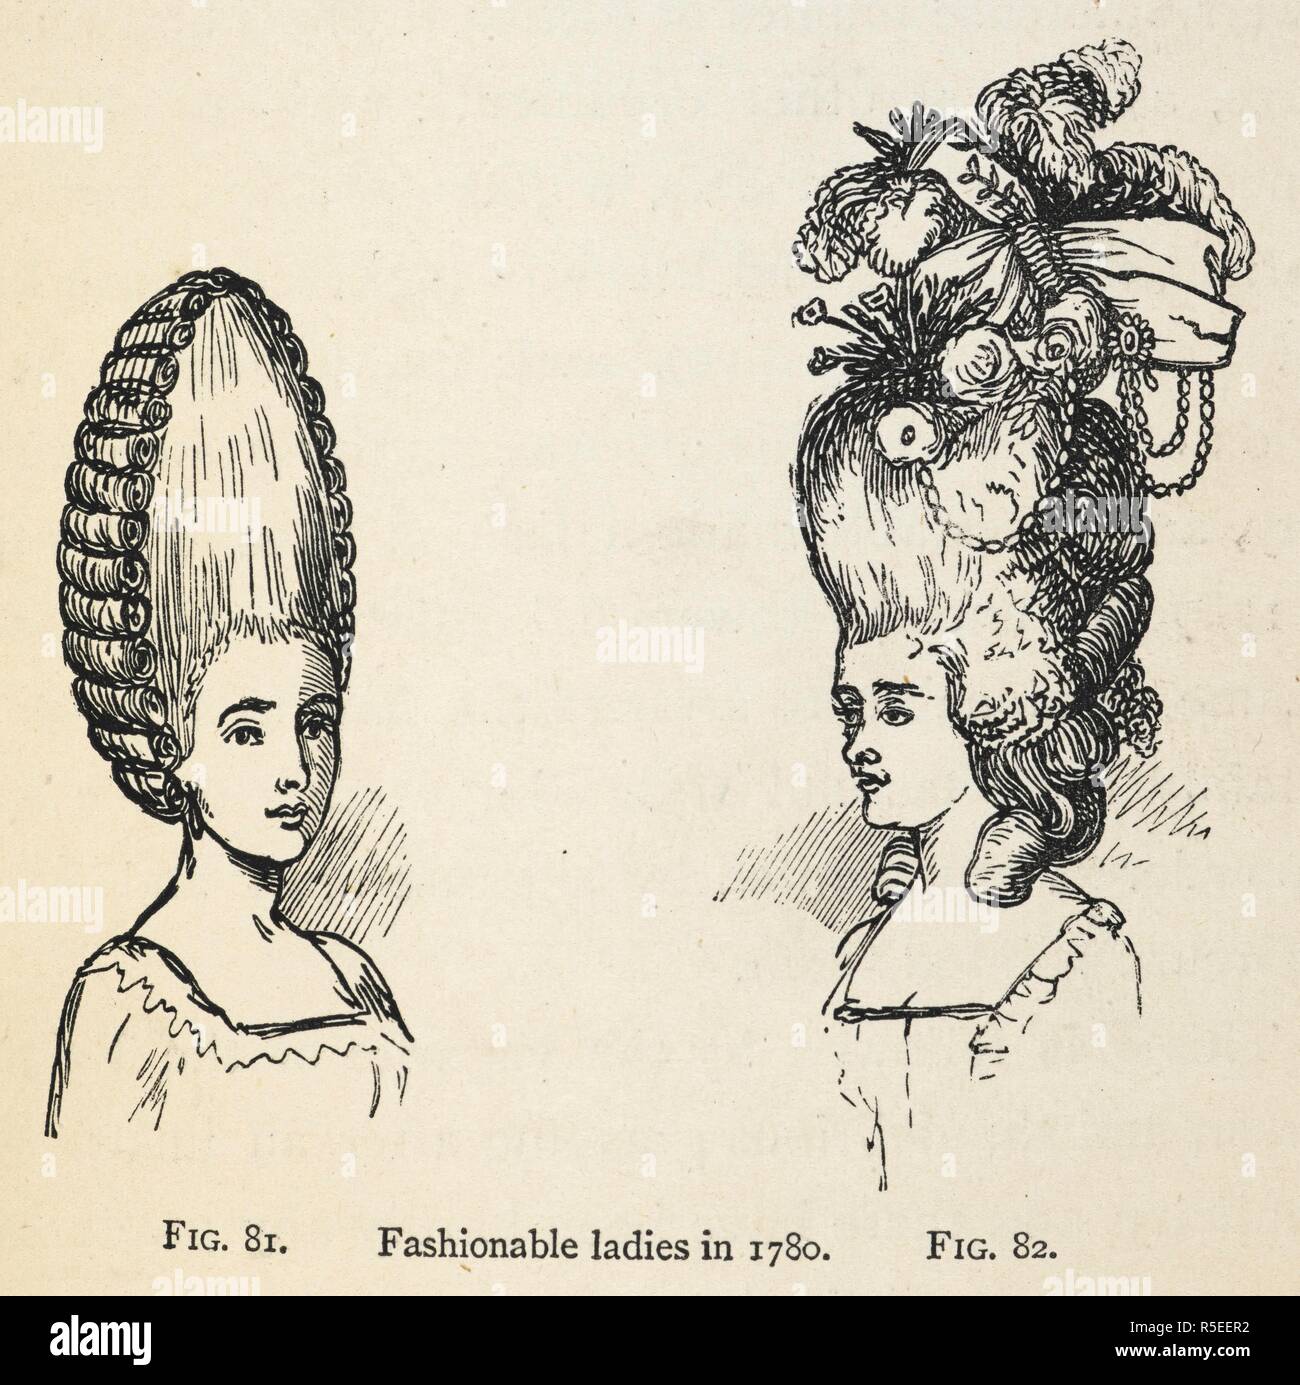 fashionable ladies in 1780'. two illustrations showing